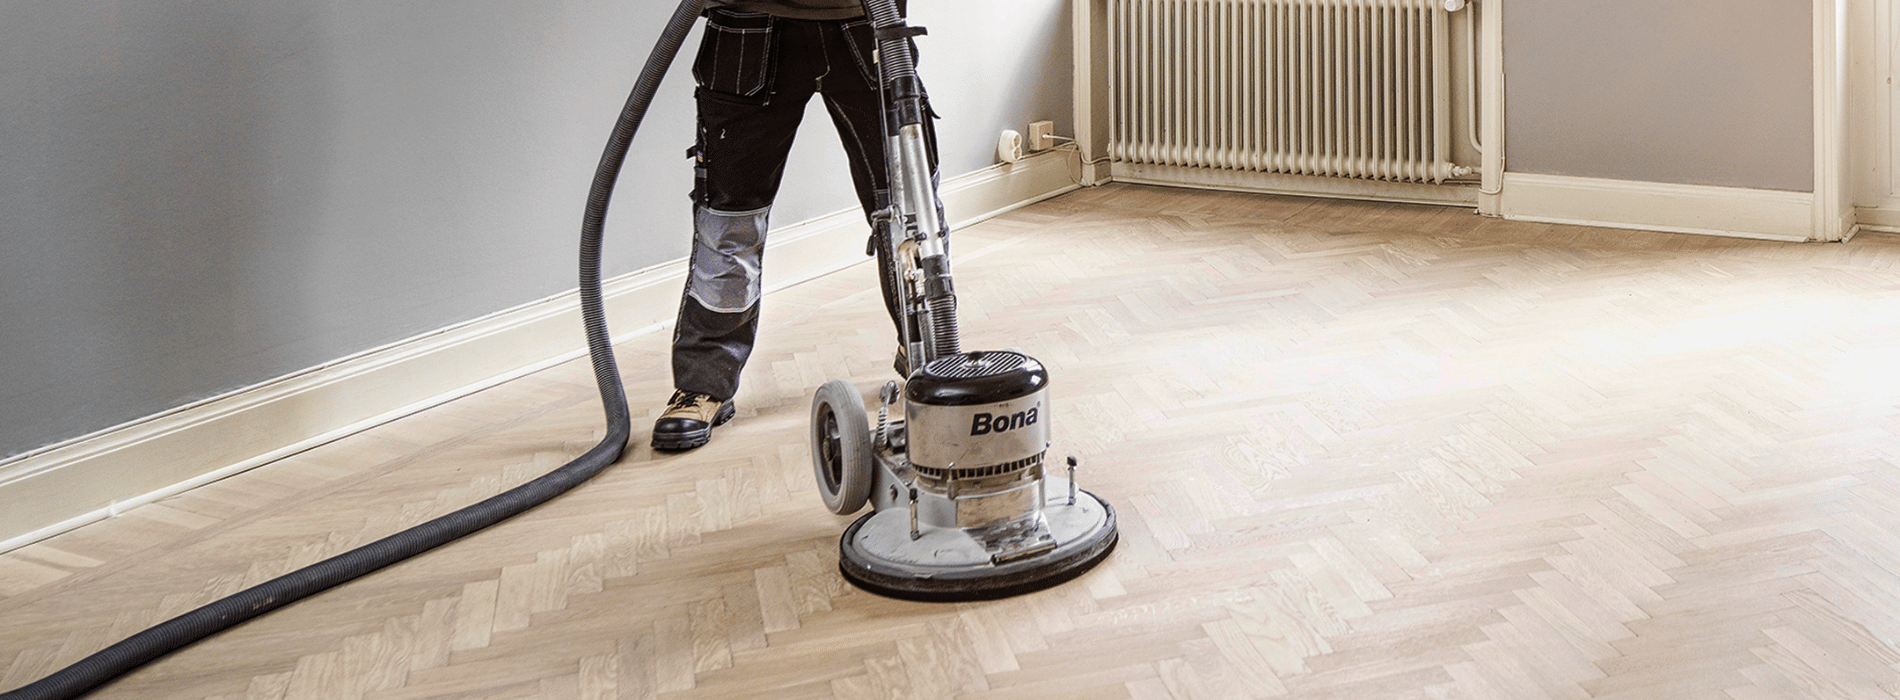 In Upper Edmonton, N18, Mr Sander® using a Bona FlexiSand 1.9, a powerful buffer sander with a 407 mm dimension, 1.9 kW effect, and 230 V voltage. With a frequency of 50 Hz/60 Hz, it connects to a dust extraction system with a HEPA filter for optimal cleanliness and efficiency during the sanding of a herringbone floor.